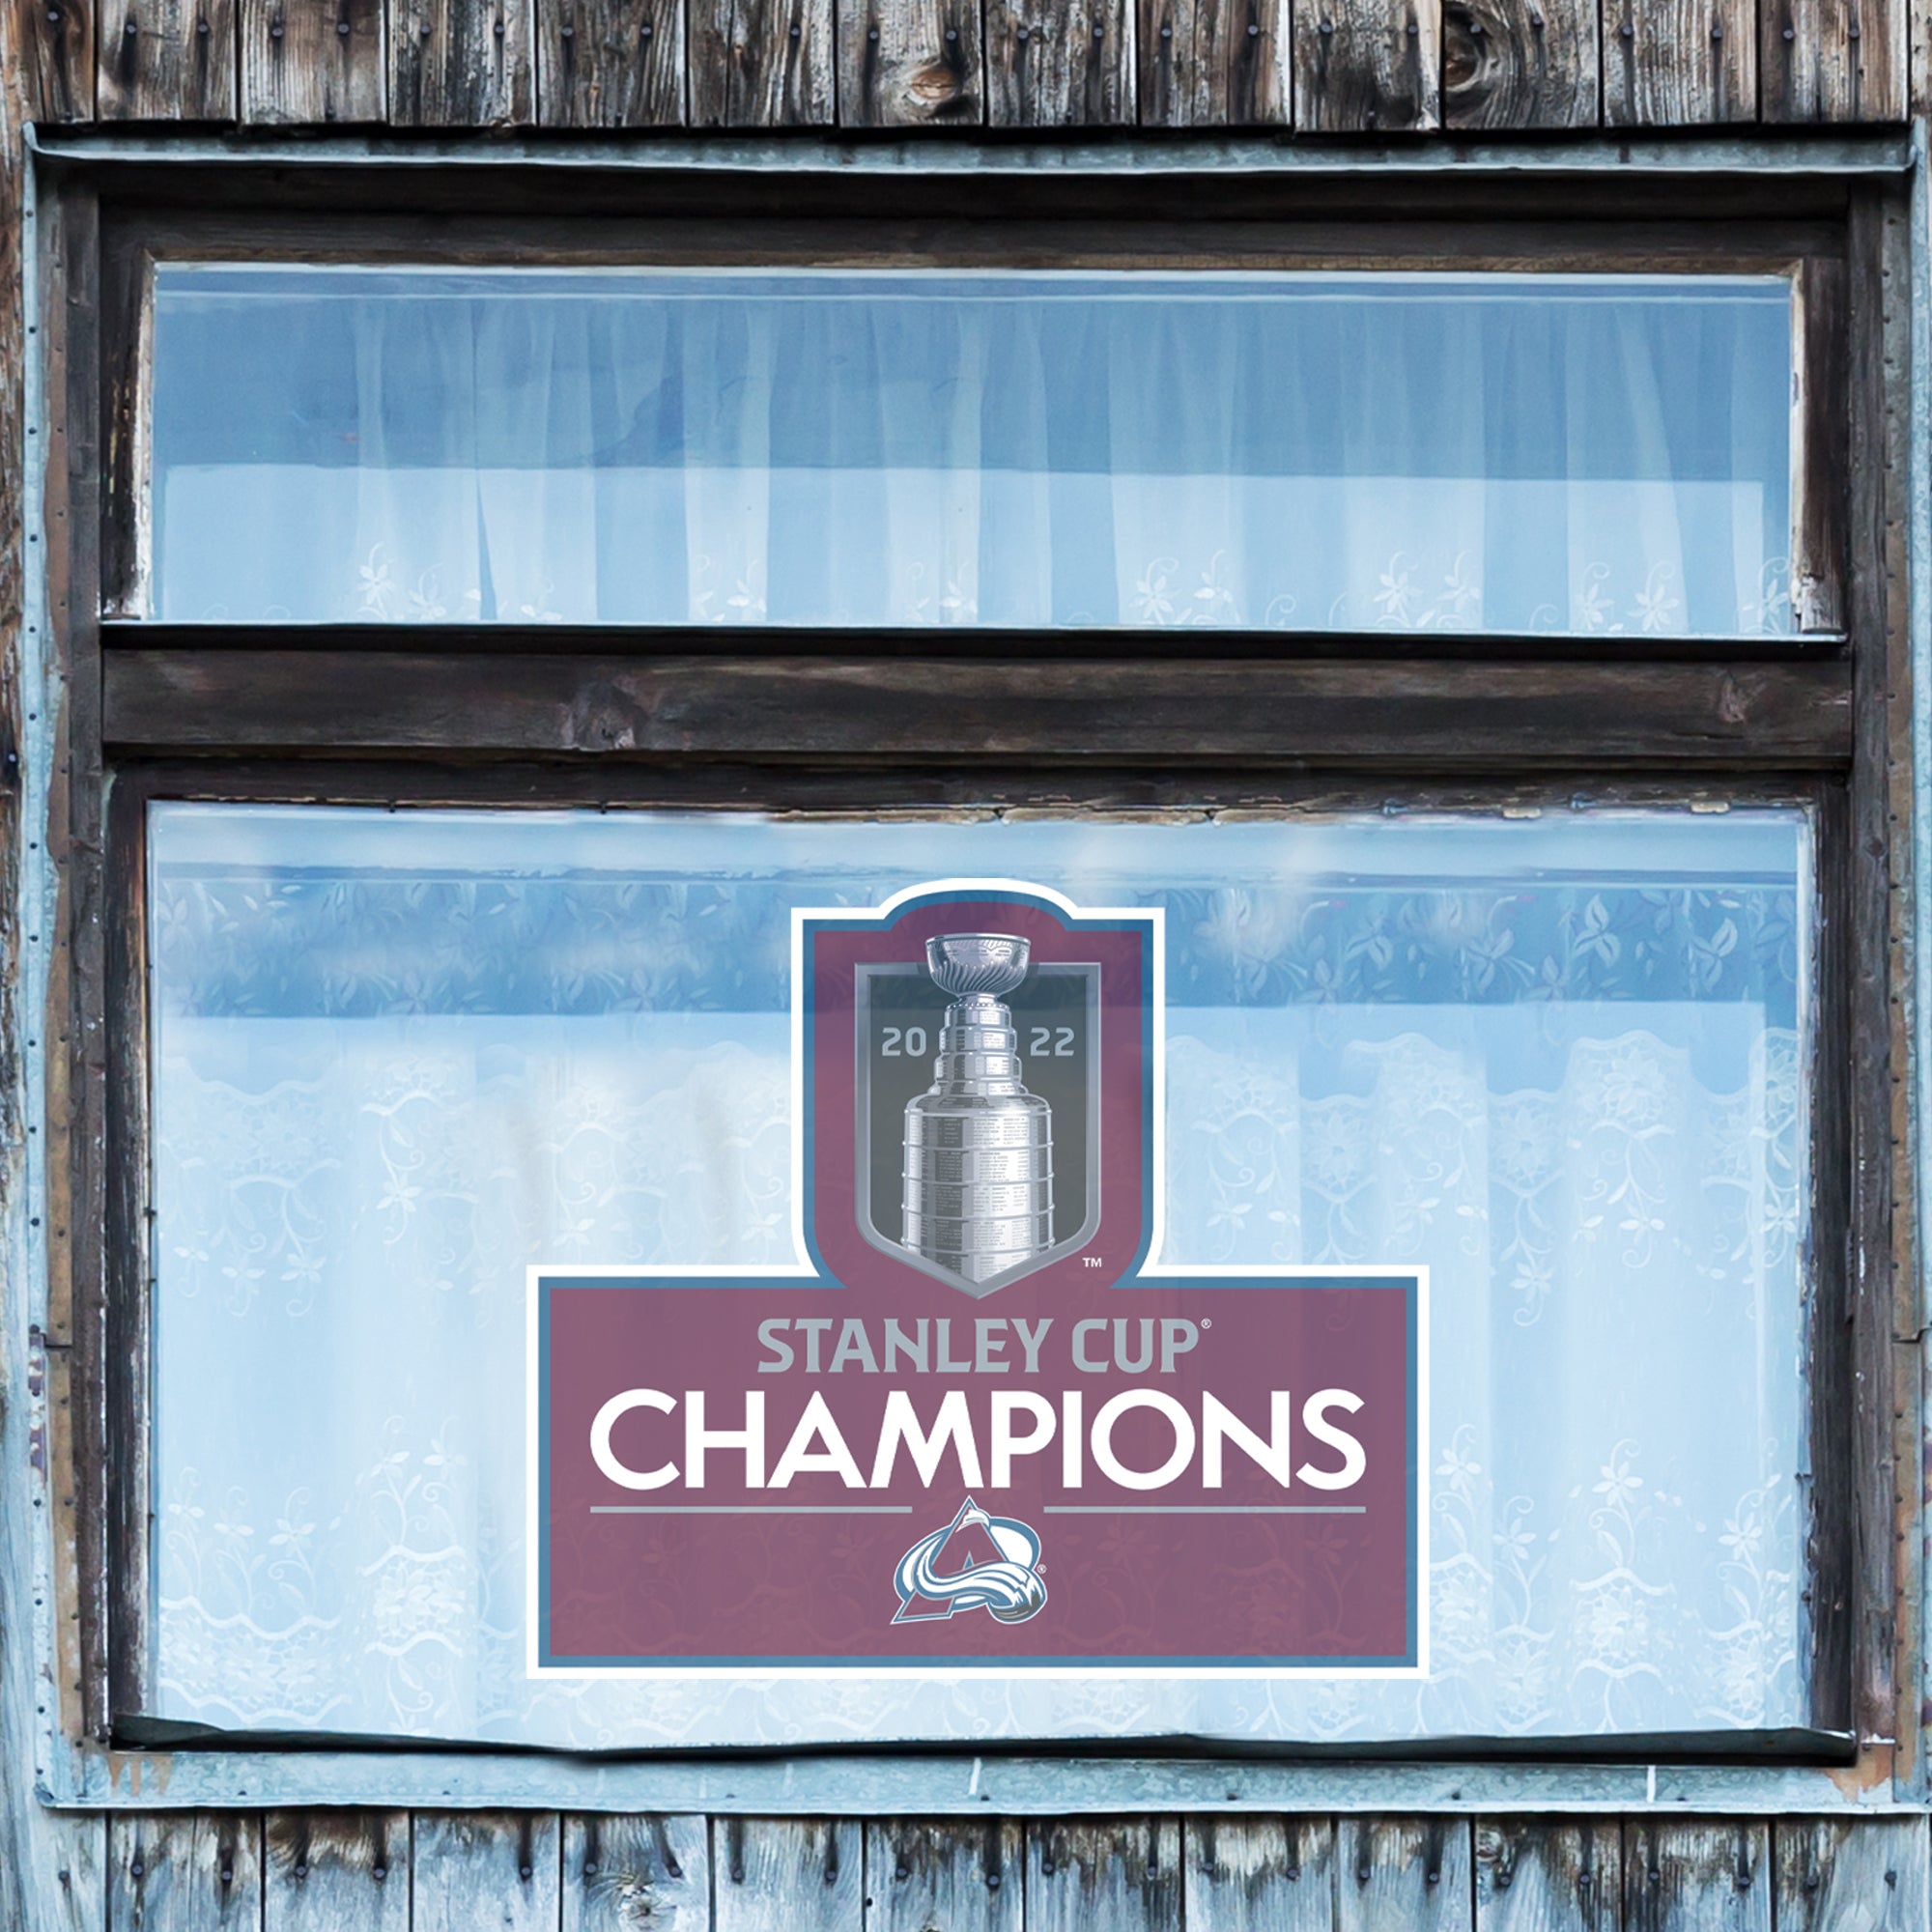 Colorado Avalanche 2022 Stanley Cup Champions Decal / Sticker